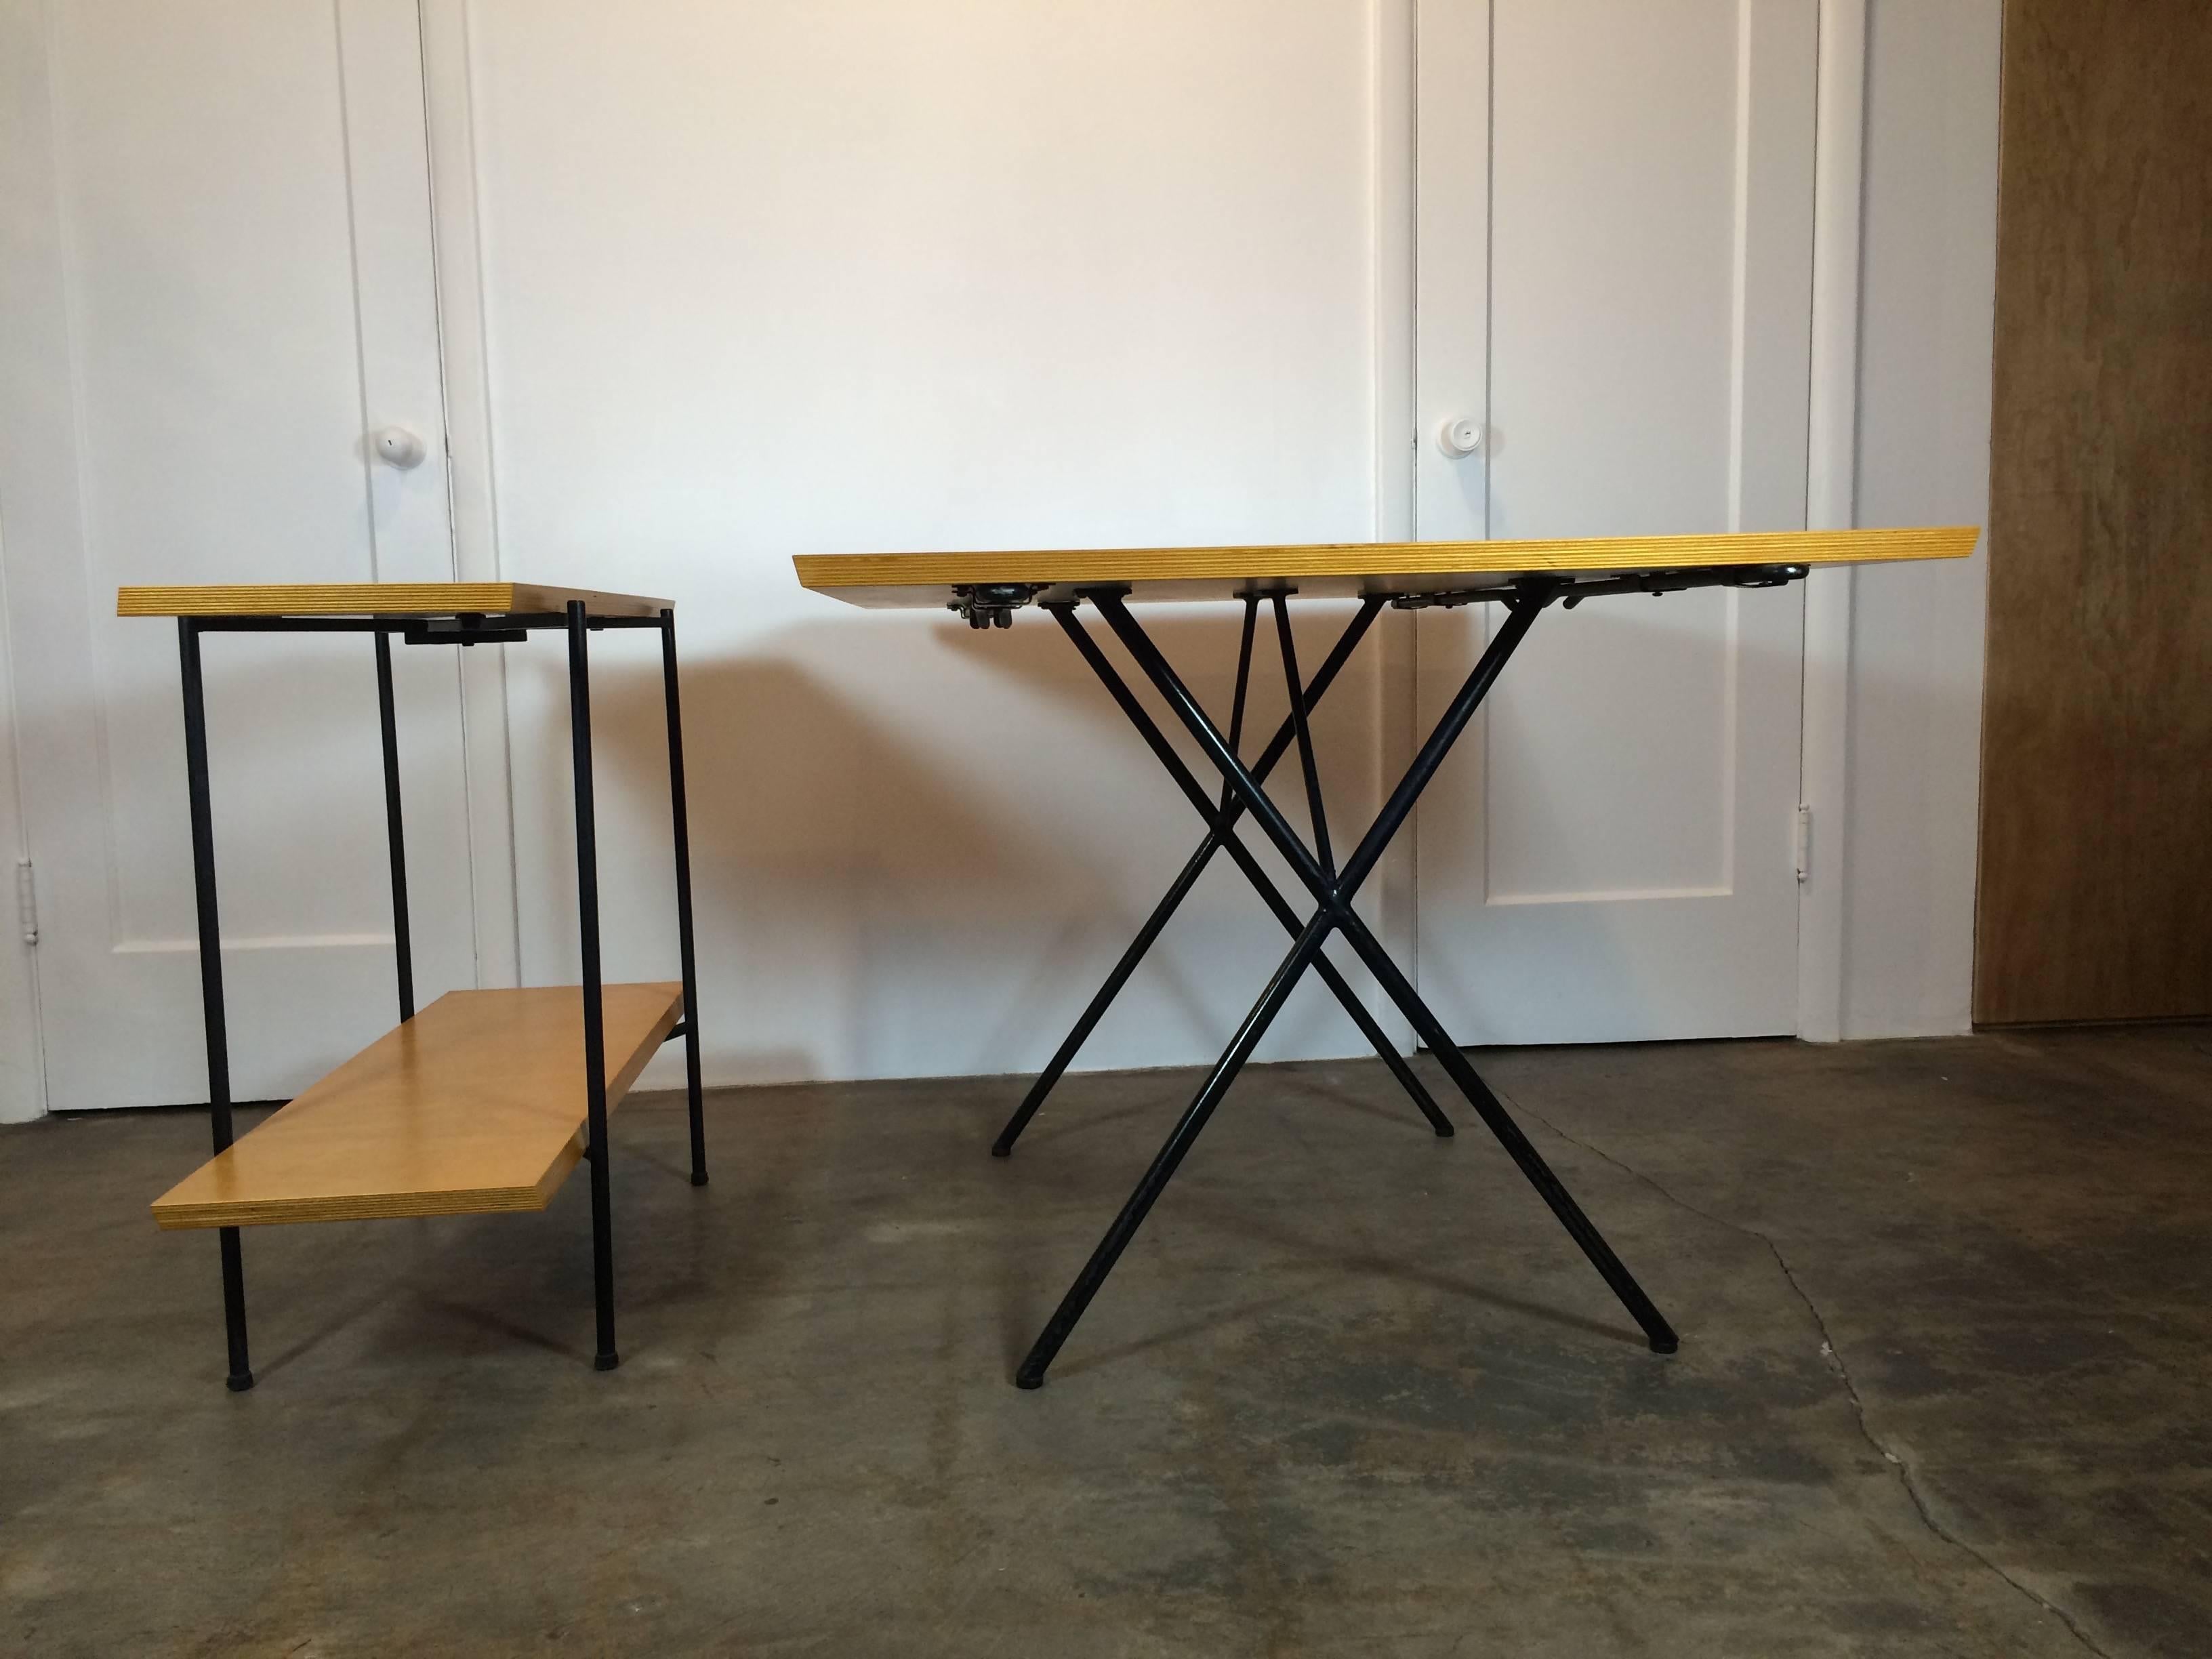 Very rare Tony Paul table and server. The two leaves for the table make up the server, and the frame of the server folds out of the way for storage. Rods underneath the table extend out to support the end leaves. Steel frame, birch top. The frame is